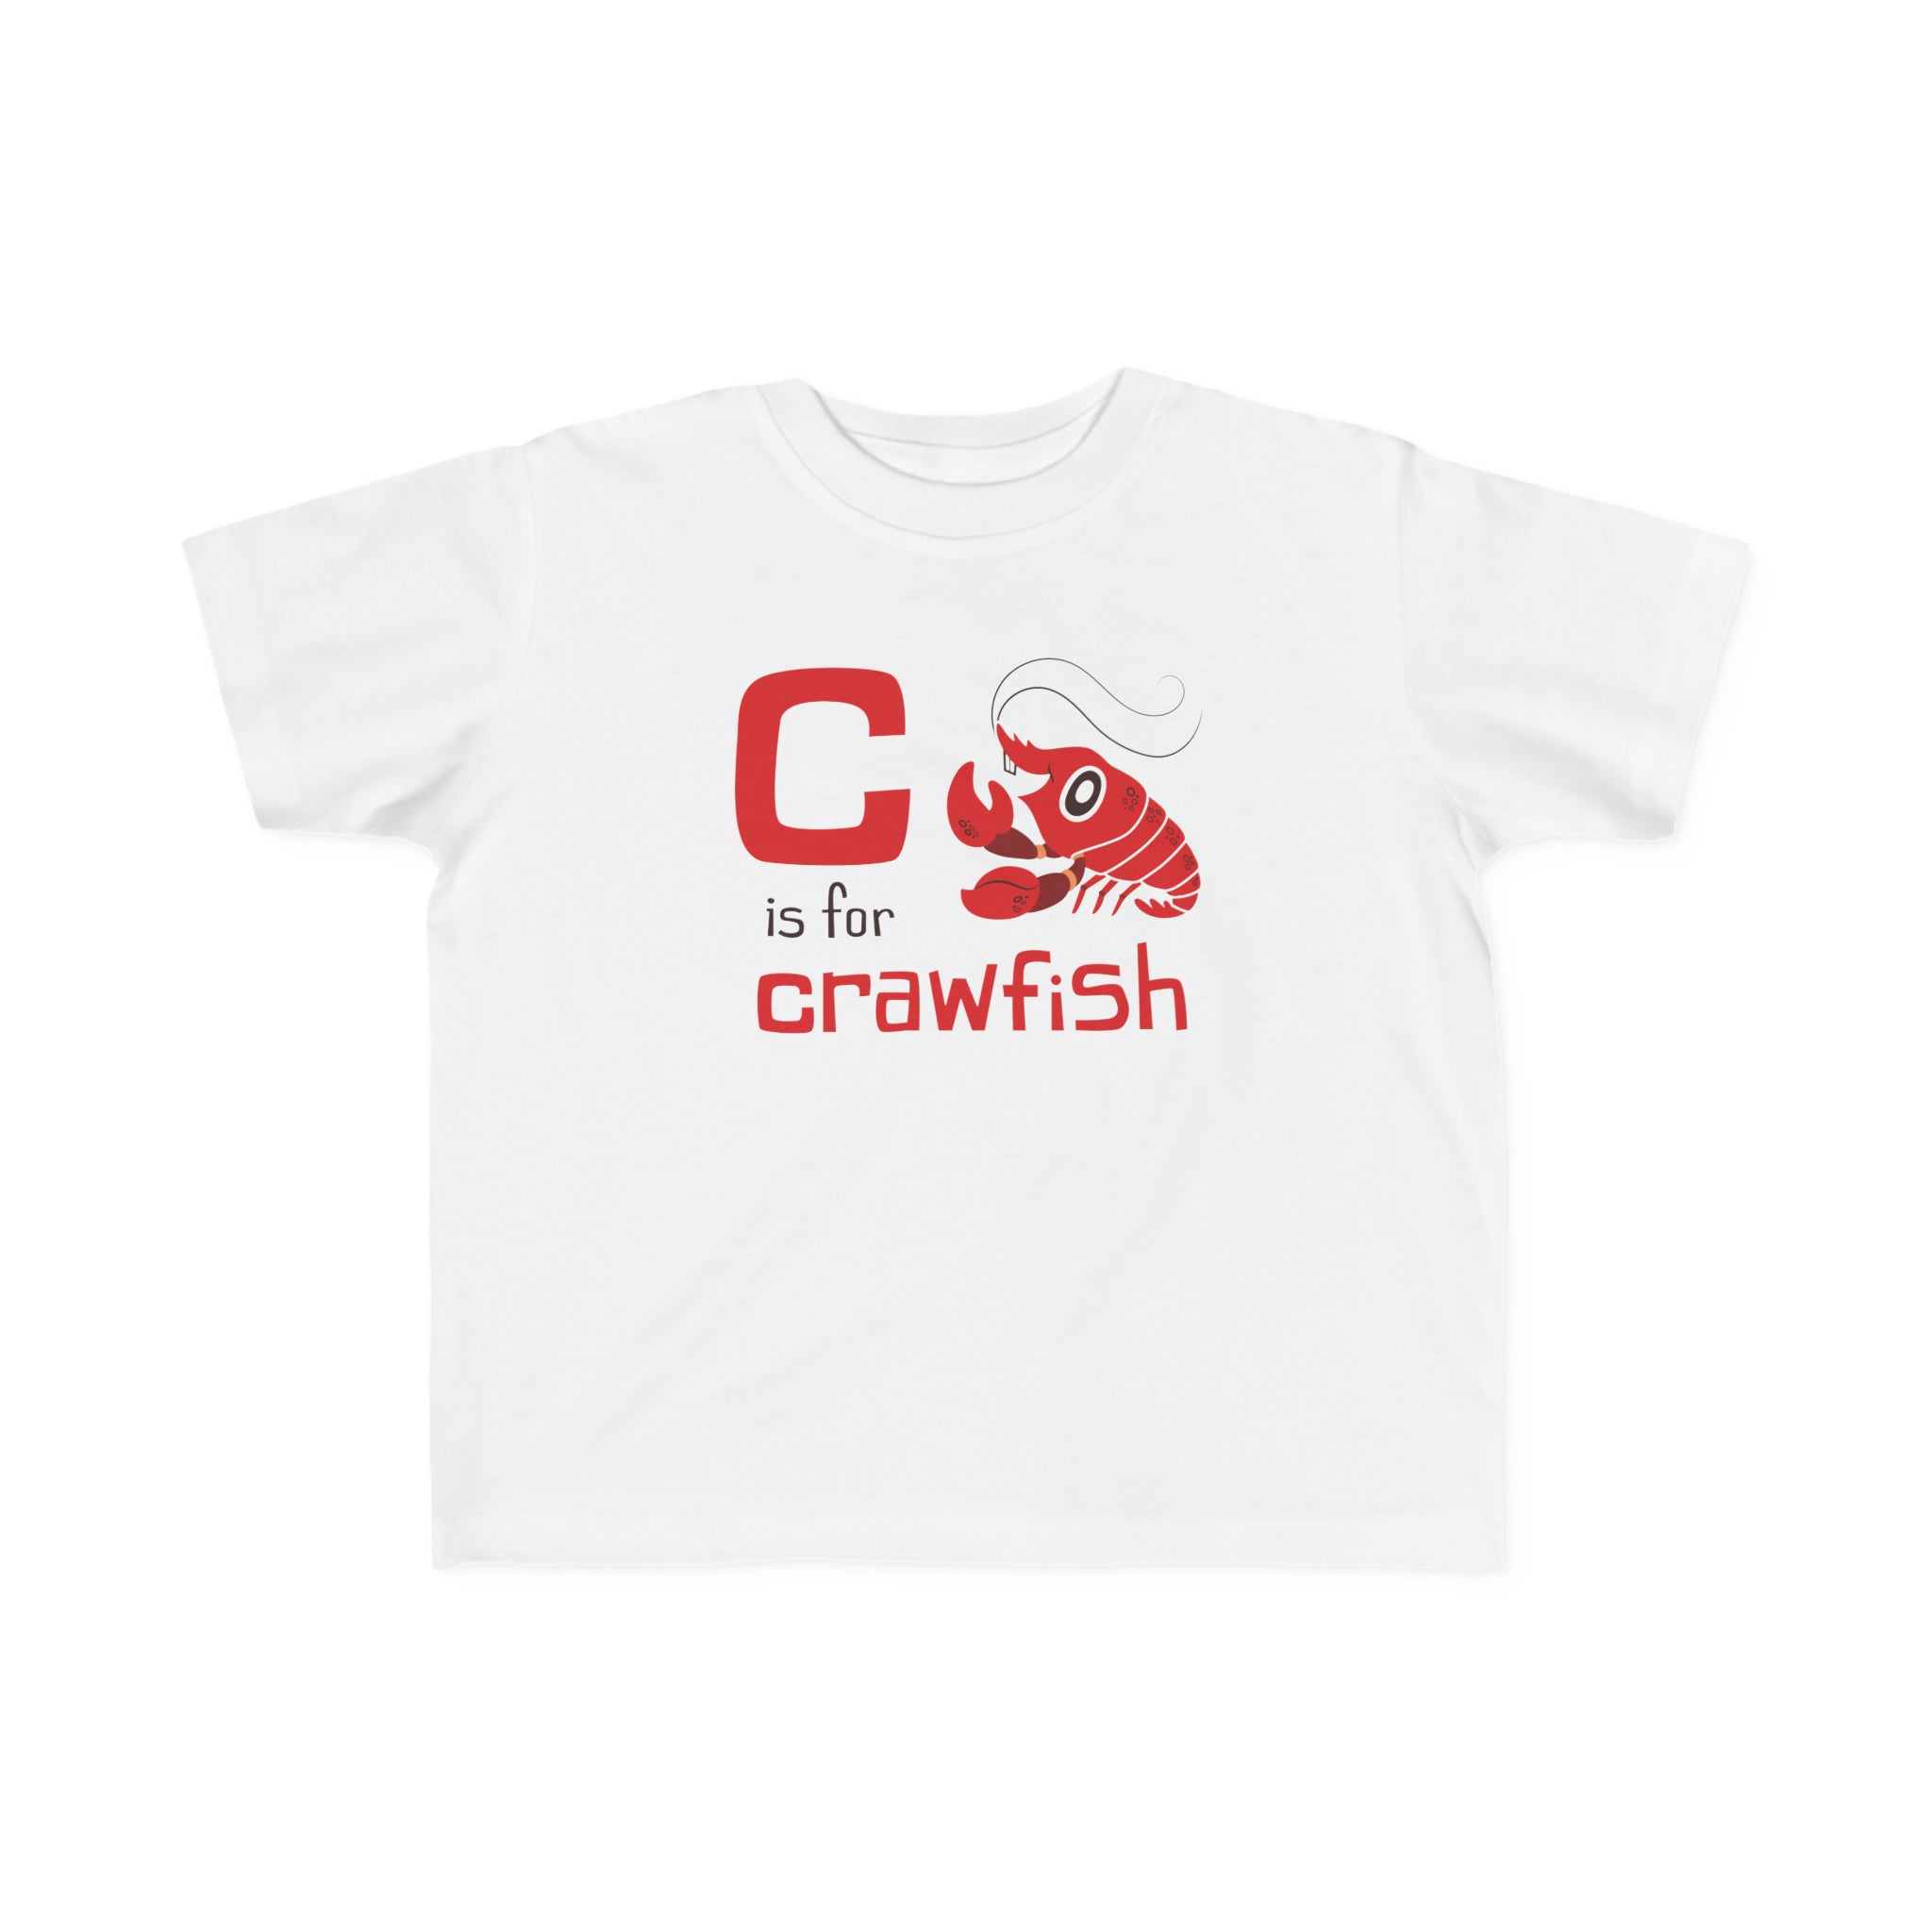 C is for Crawfish Kids - Dirty Coast